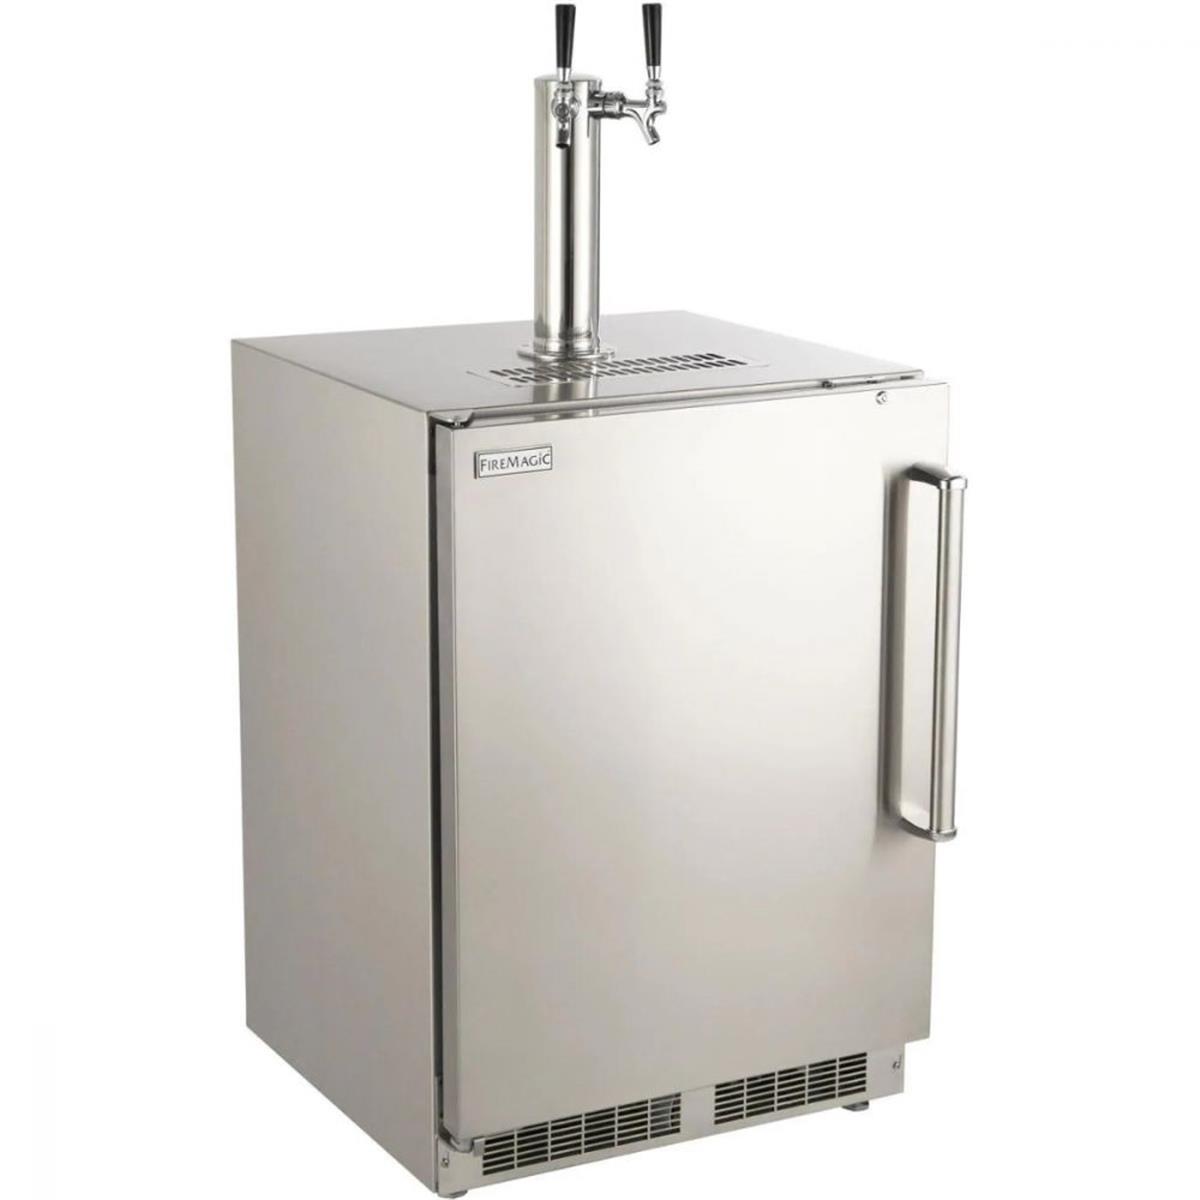 Fire Magic 3594-DL 24 in. Left Hinge Outdoor Rated Dual Tap Kegerator